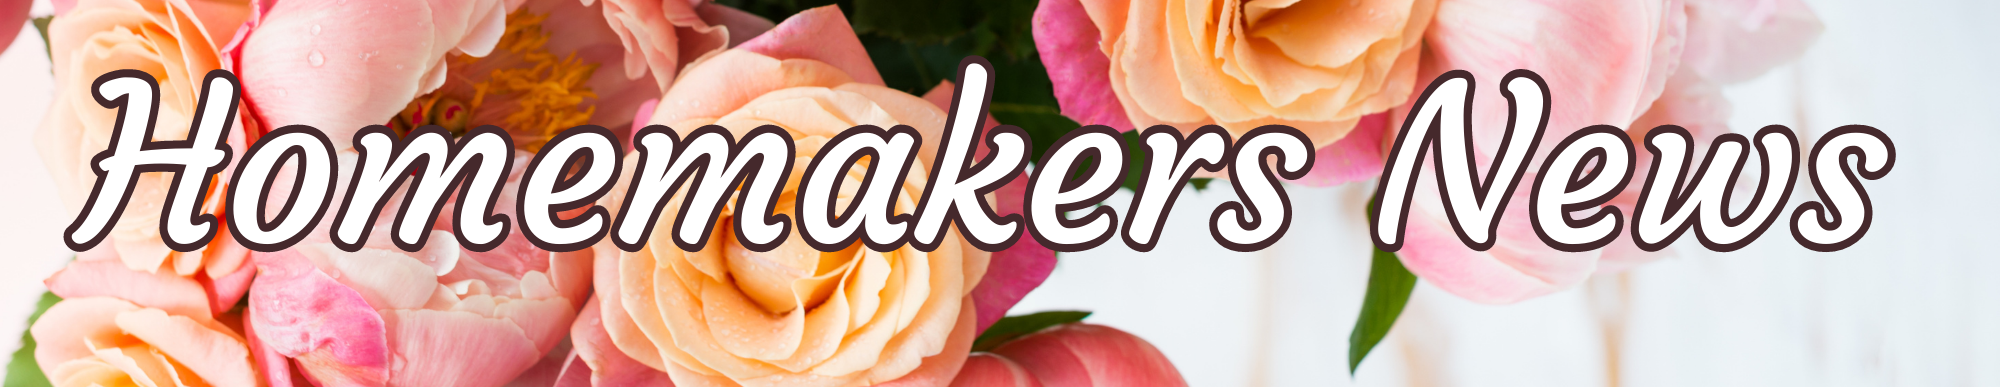 Heading that says Homemaker News on floral background